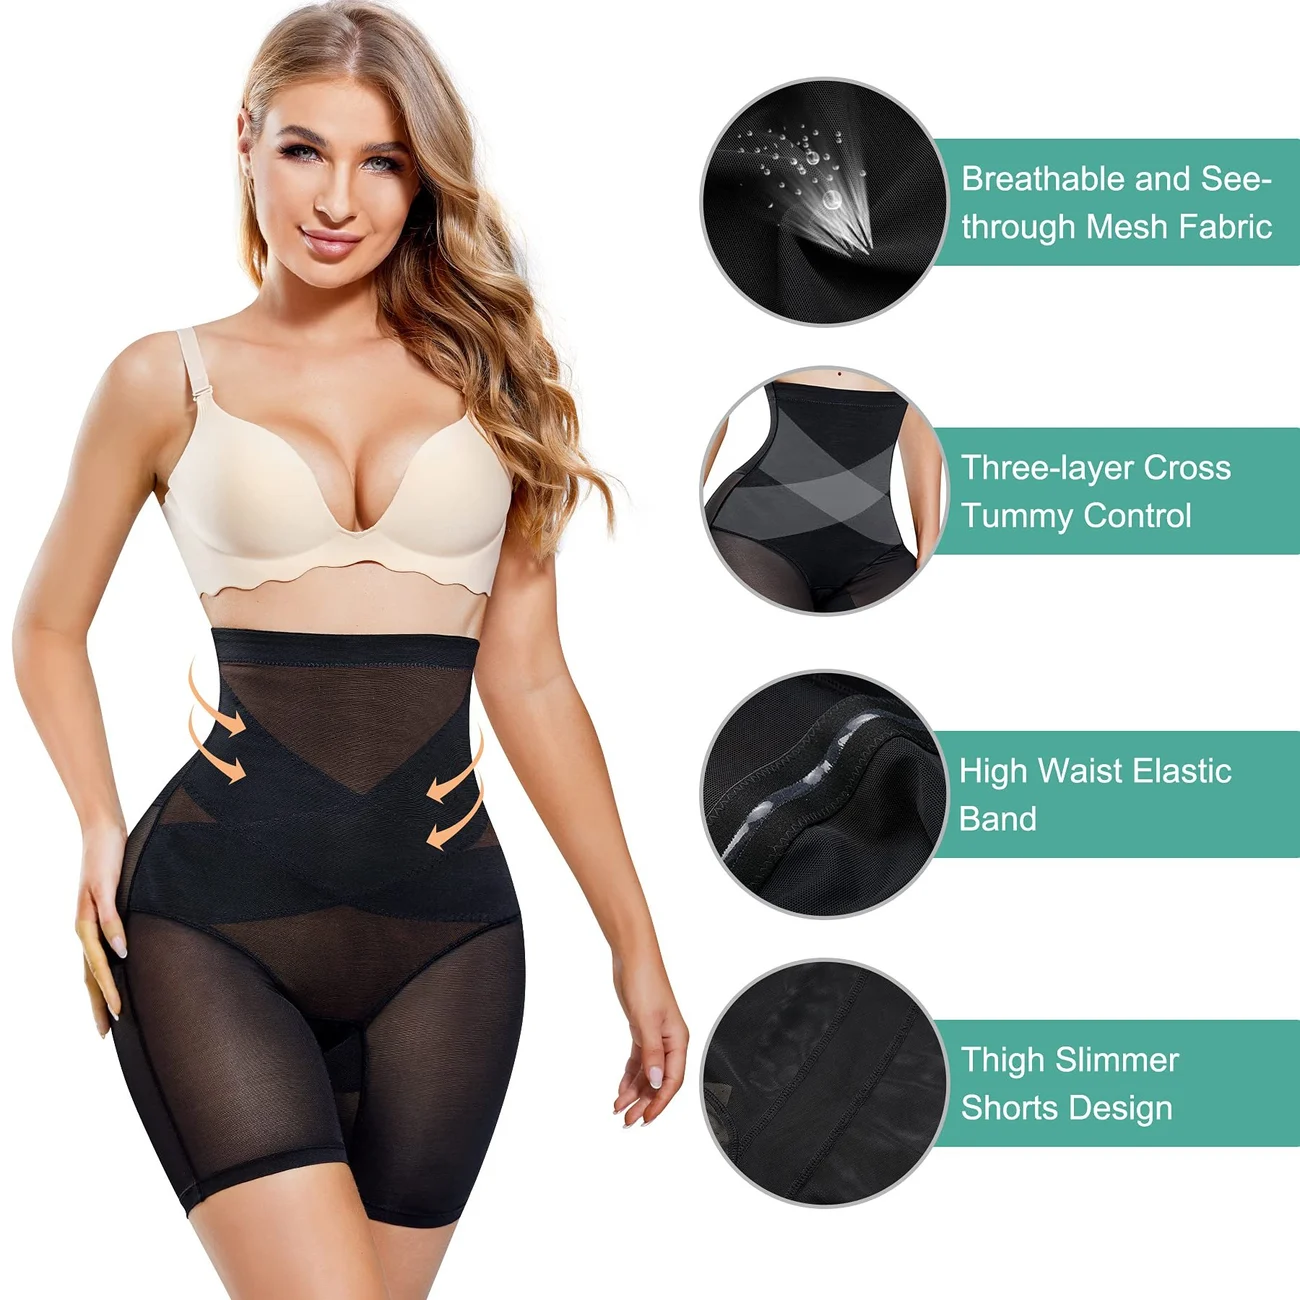 The Sexiest Shapewear you Will Ever Wear💃 - Wowelo - Your Smart Online Shop